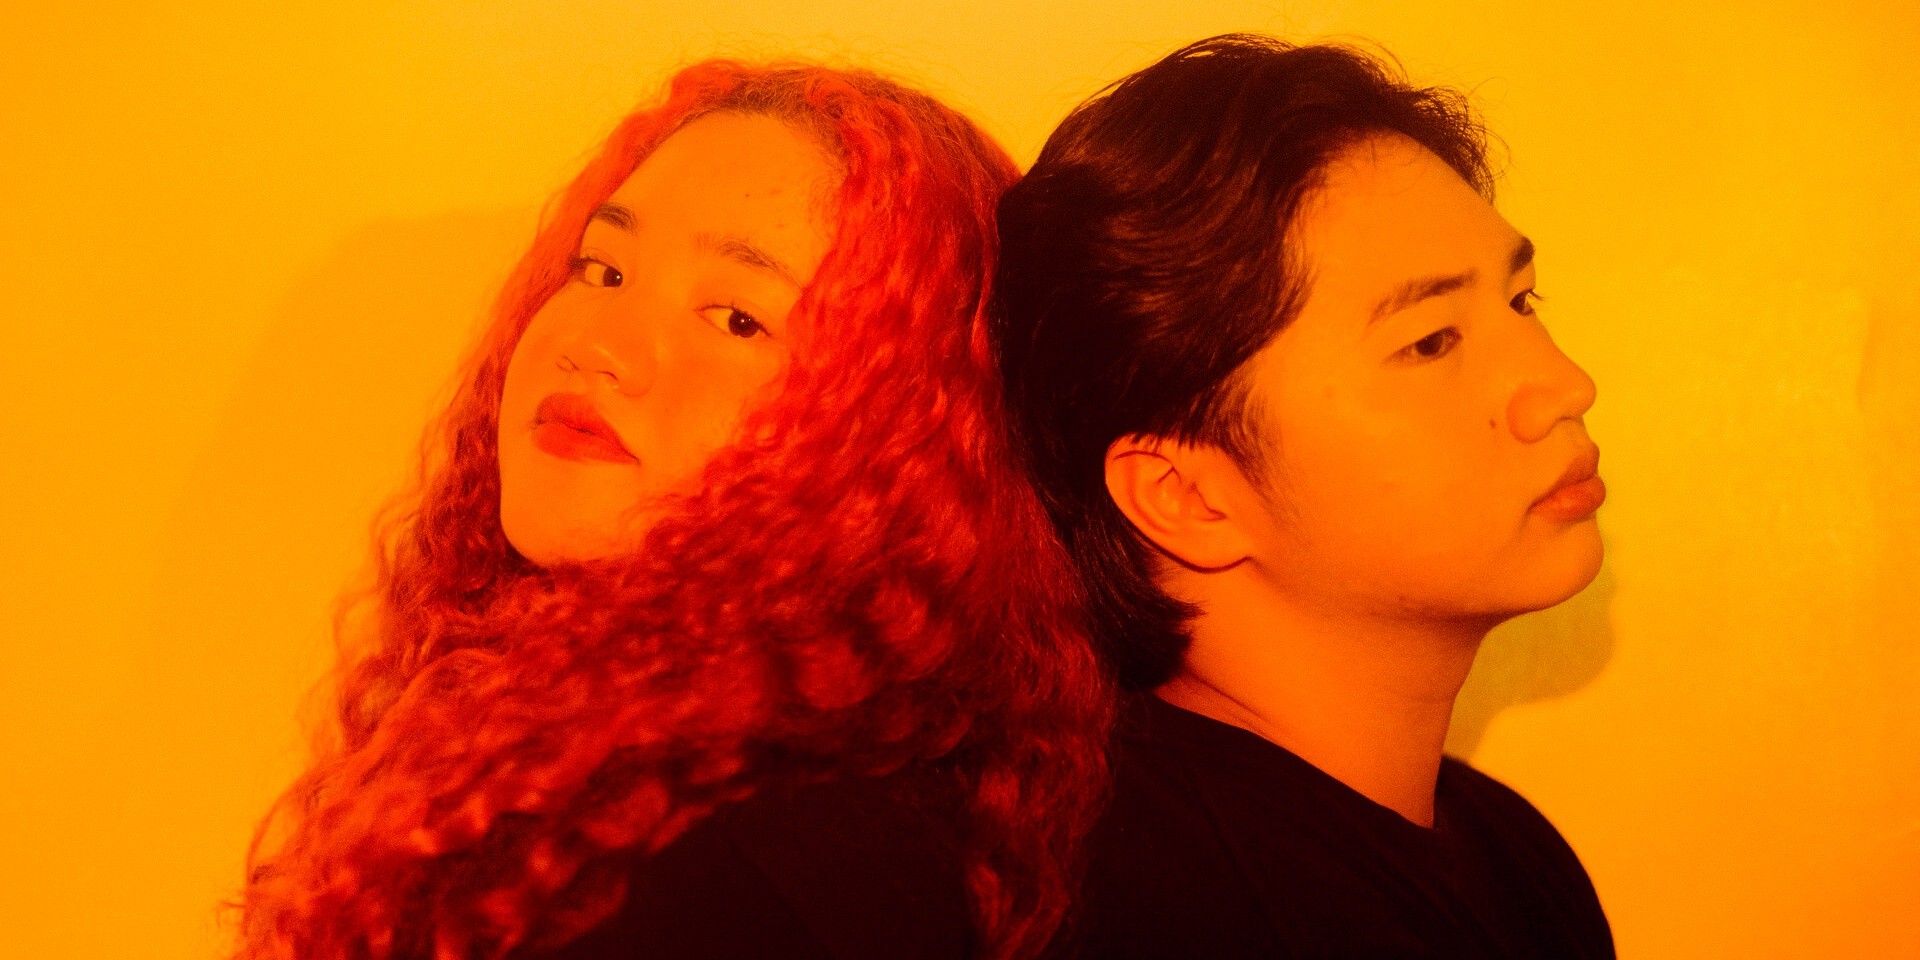 Introducing: Filipino duo Ysanygo talk delivering emotion, K-pop, and their latest single 'Glow'